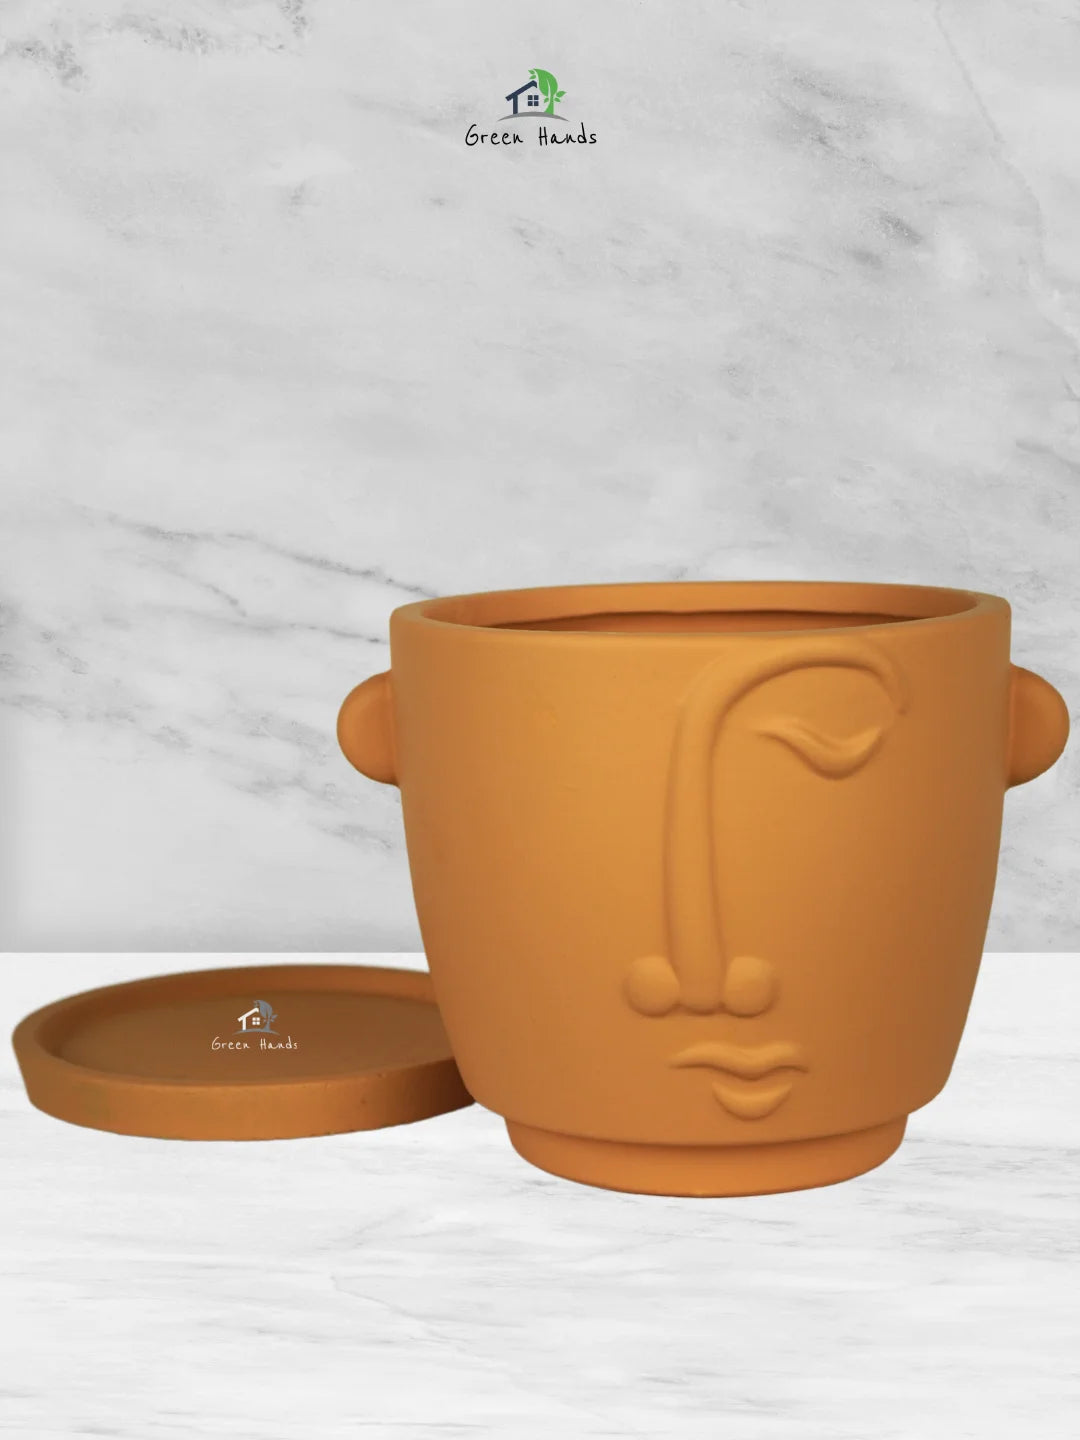 Adorable Terracotta Face Planter: The Perfect Sustainable Decorative Touch for UAE Homes